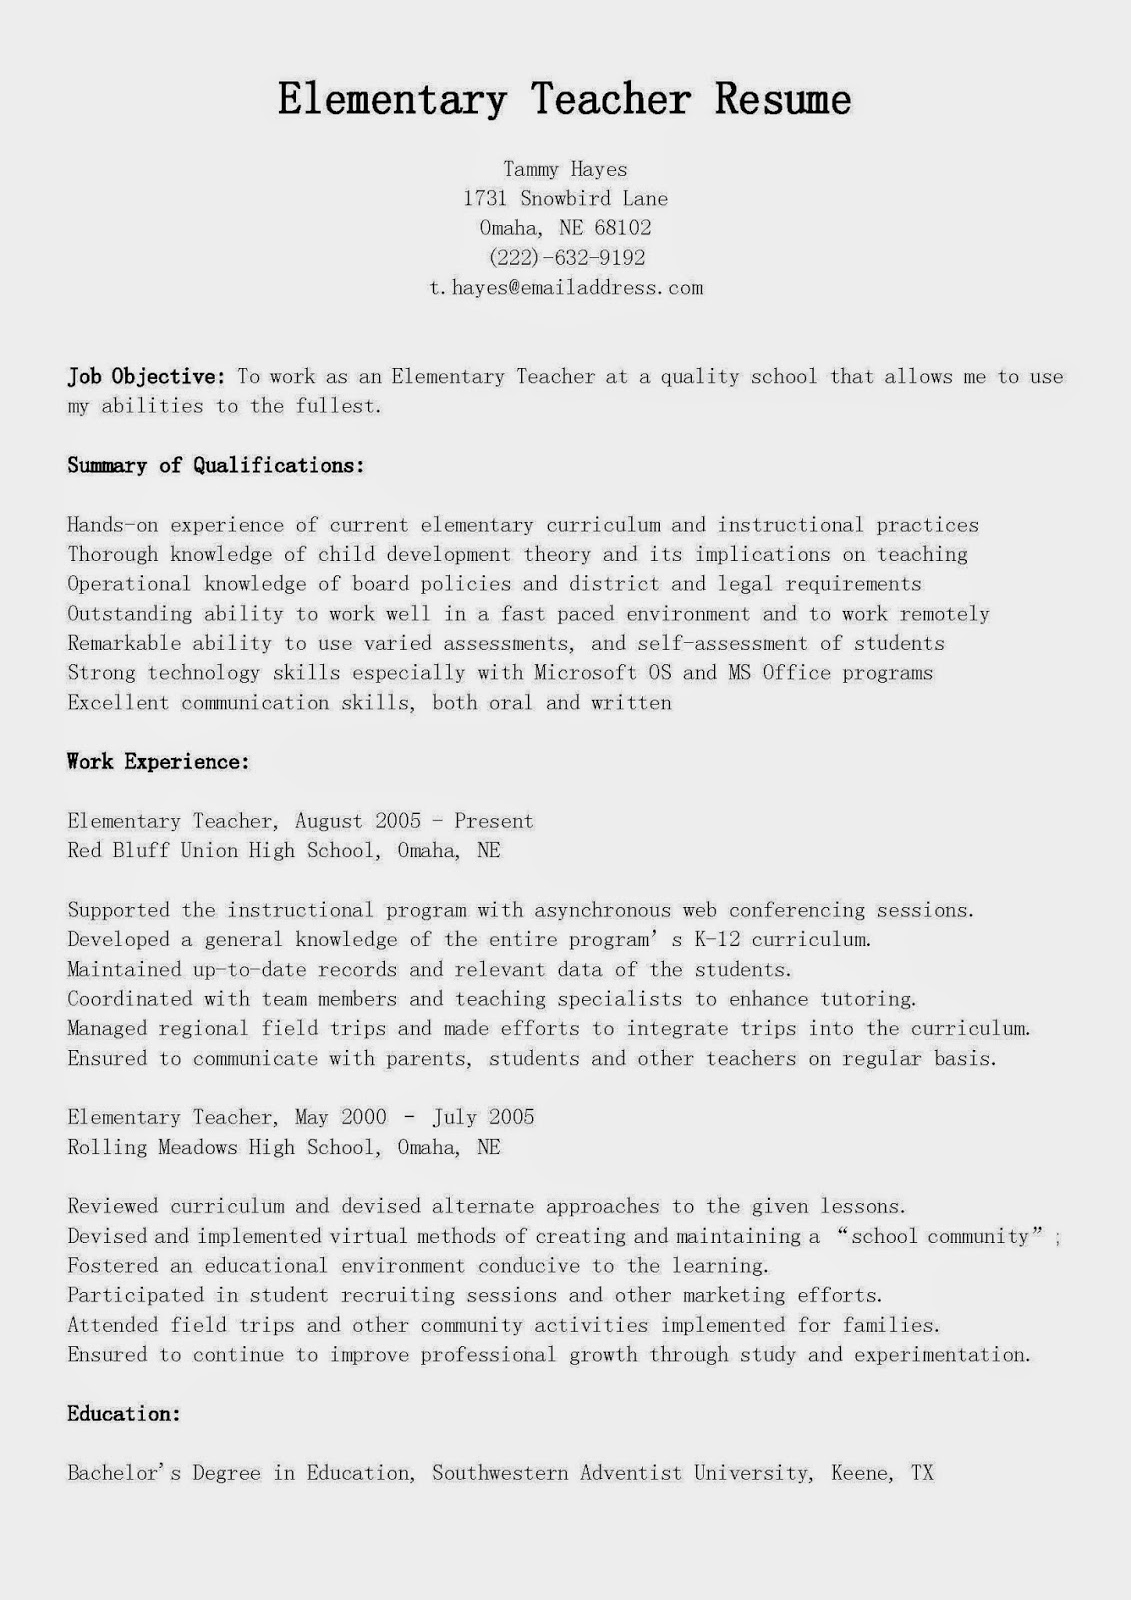 Oral and written skills resume